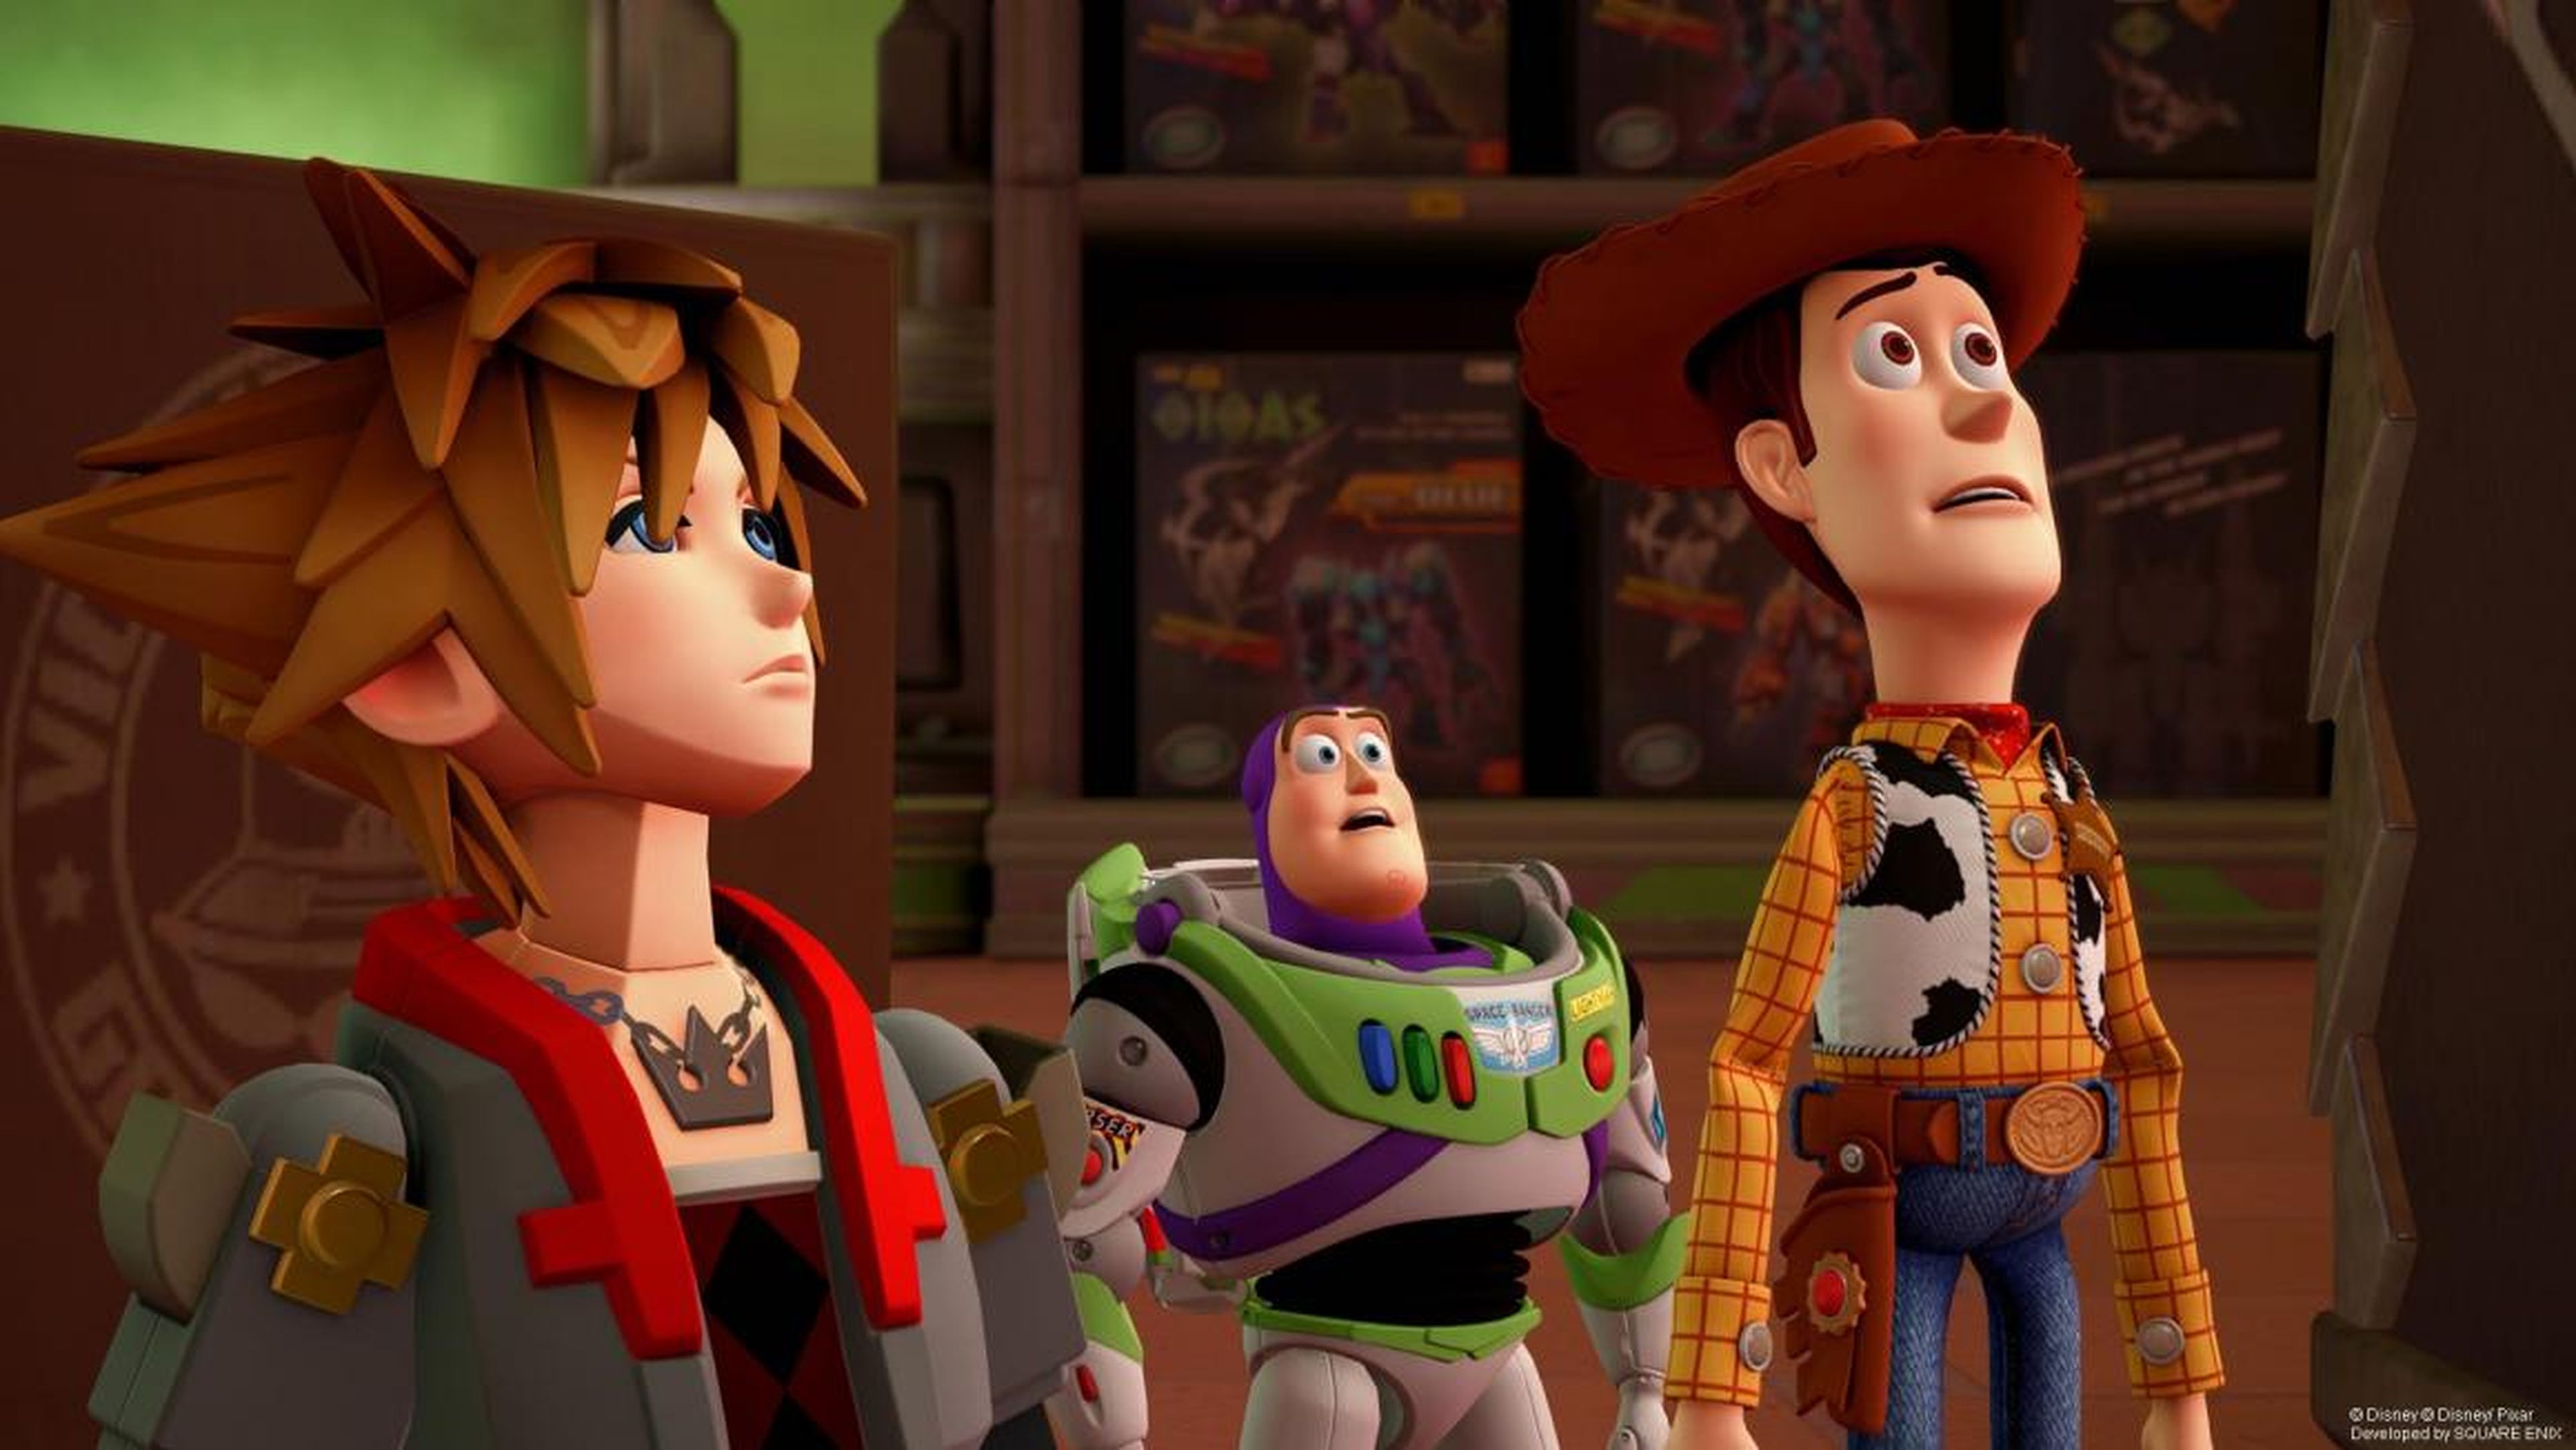 If previous games in the franchise are any indication, "Kingdom Hearts 3" is likely to occupy at least a few dozen hours of your time.